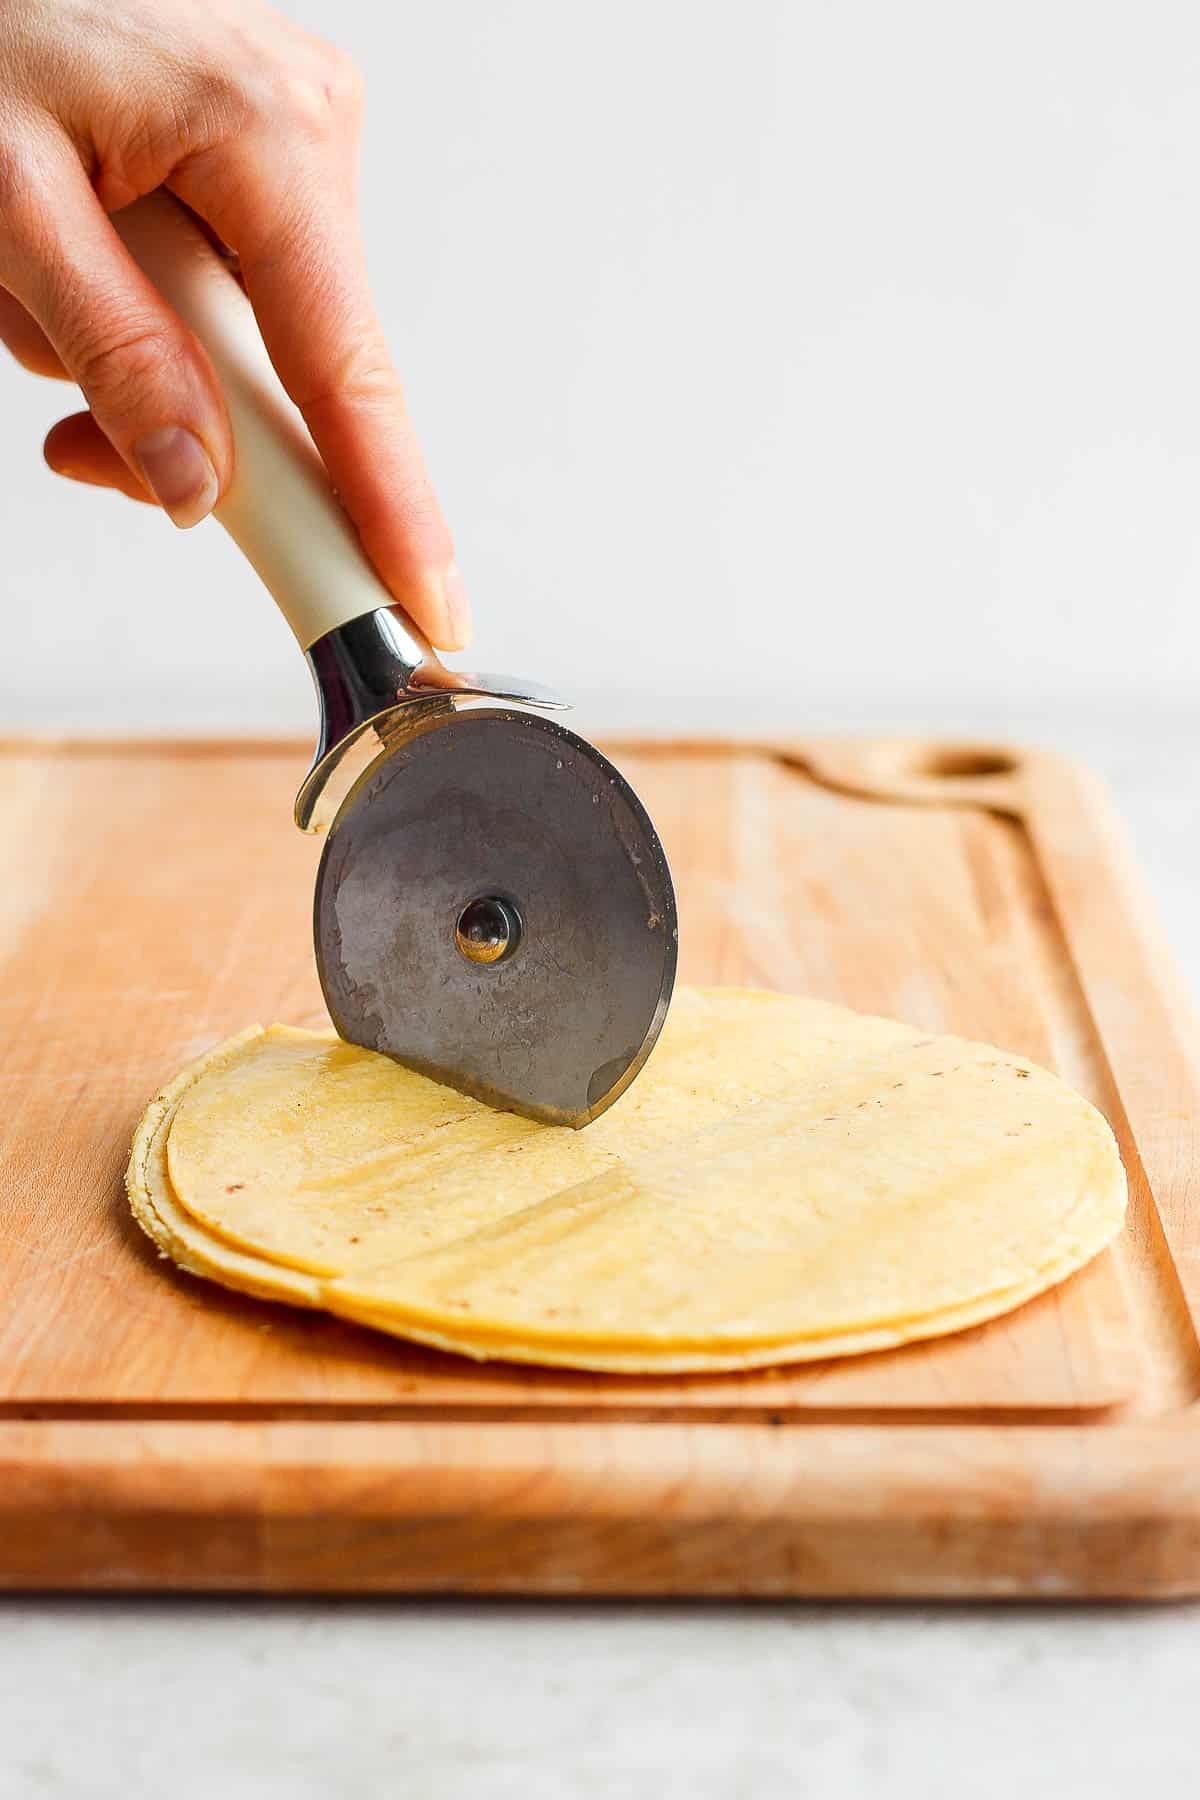 Multiple tortillas stacked and cut into quarters with a pizza cutter